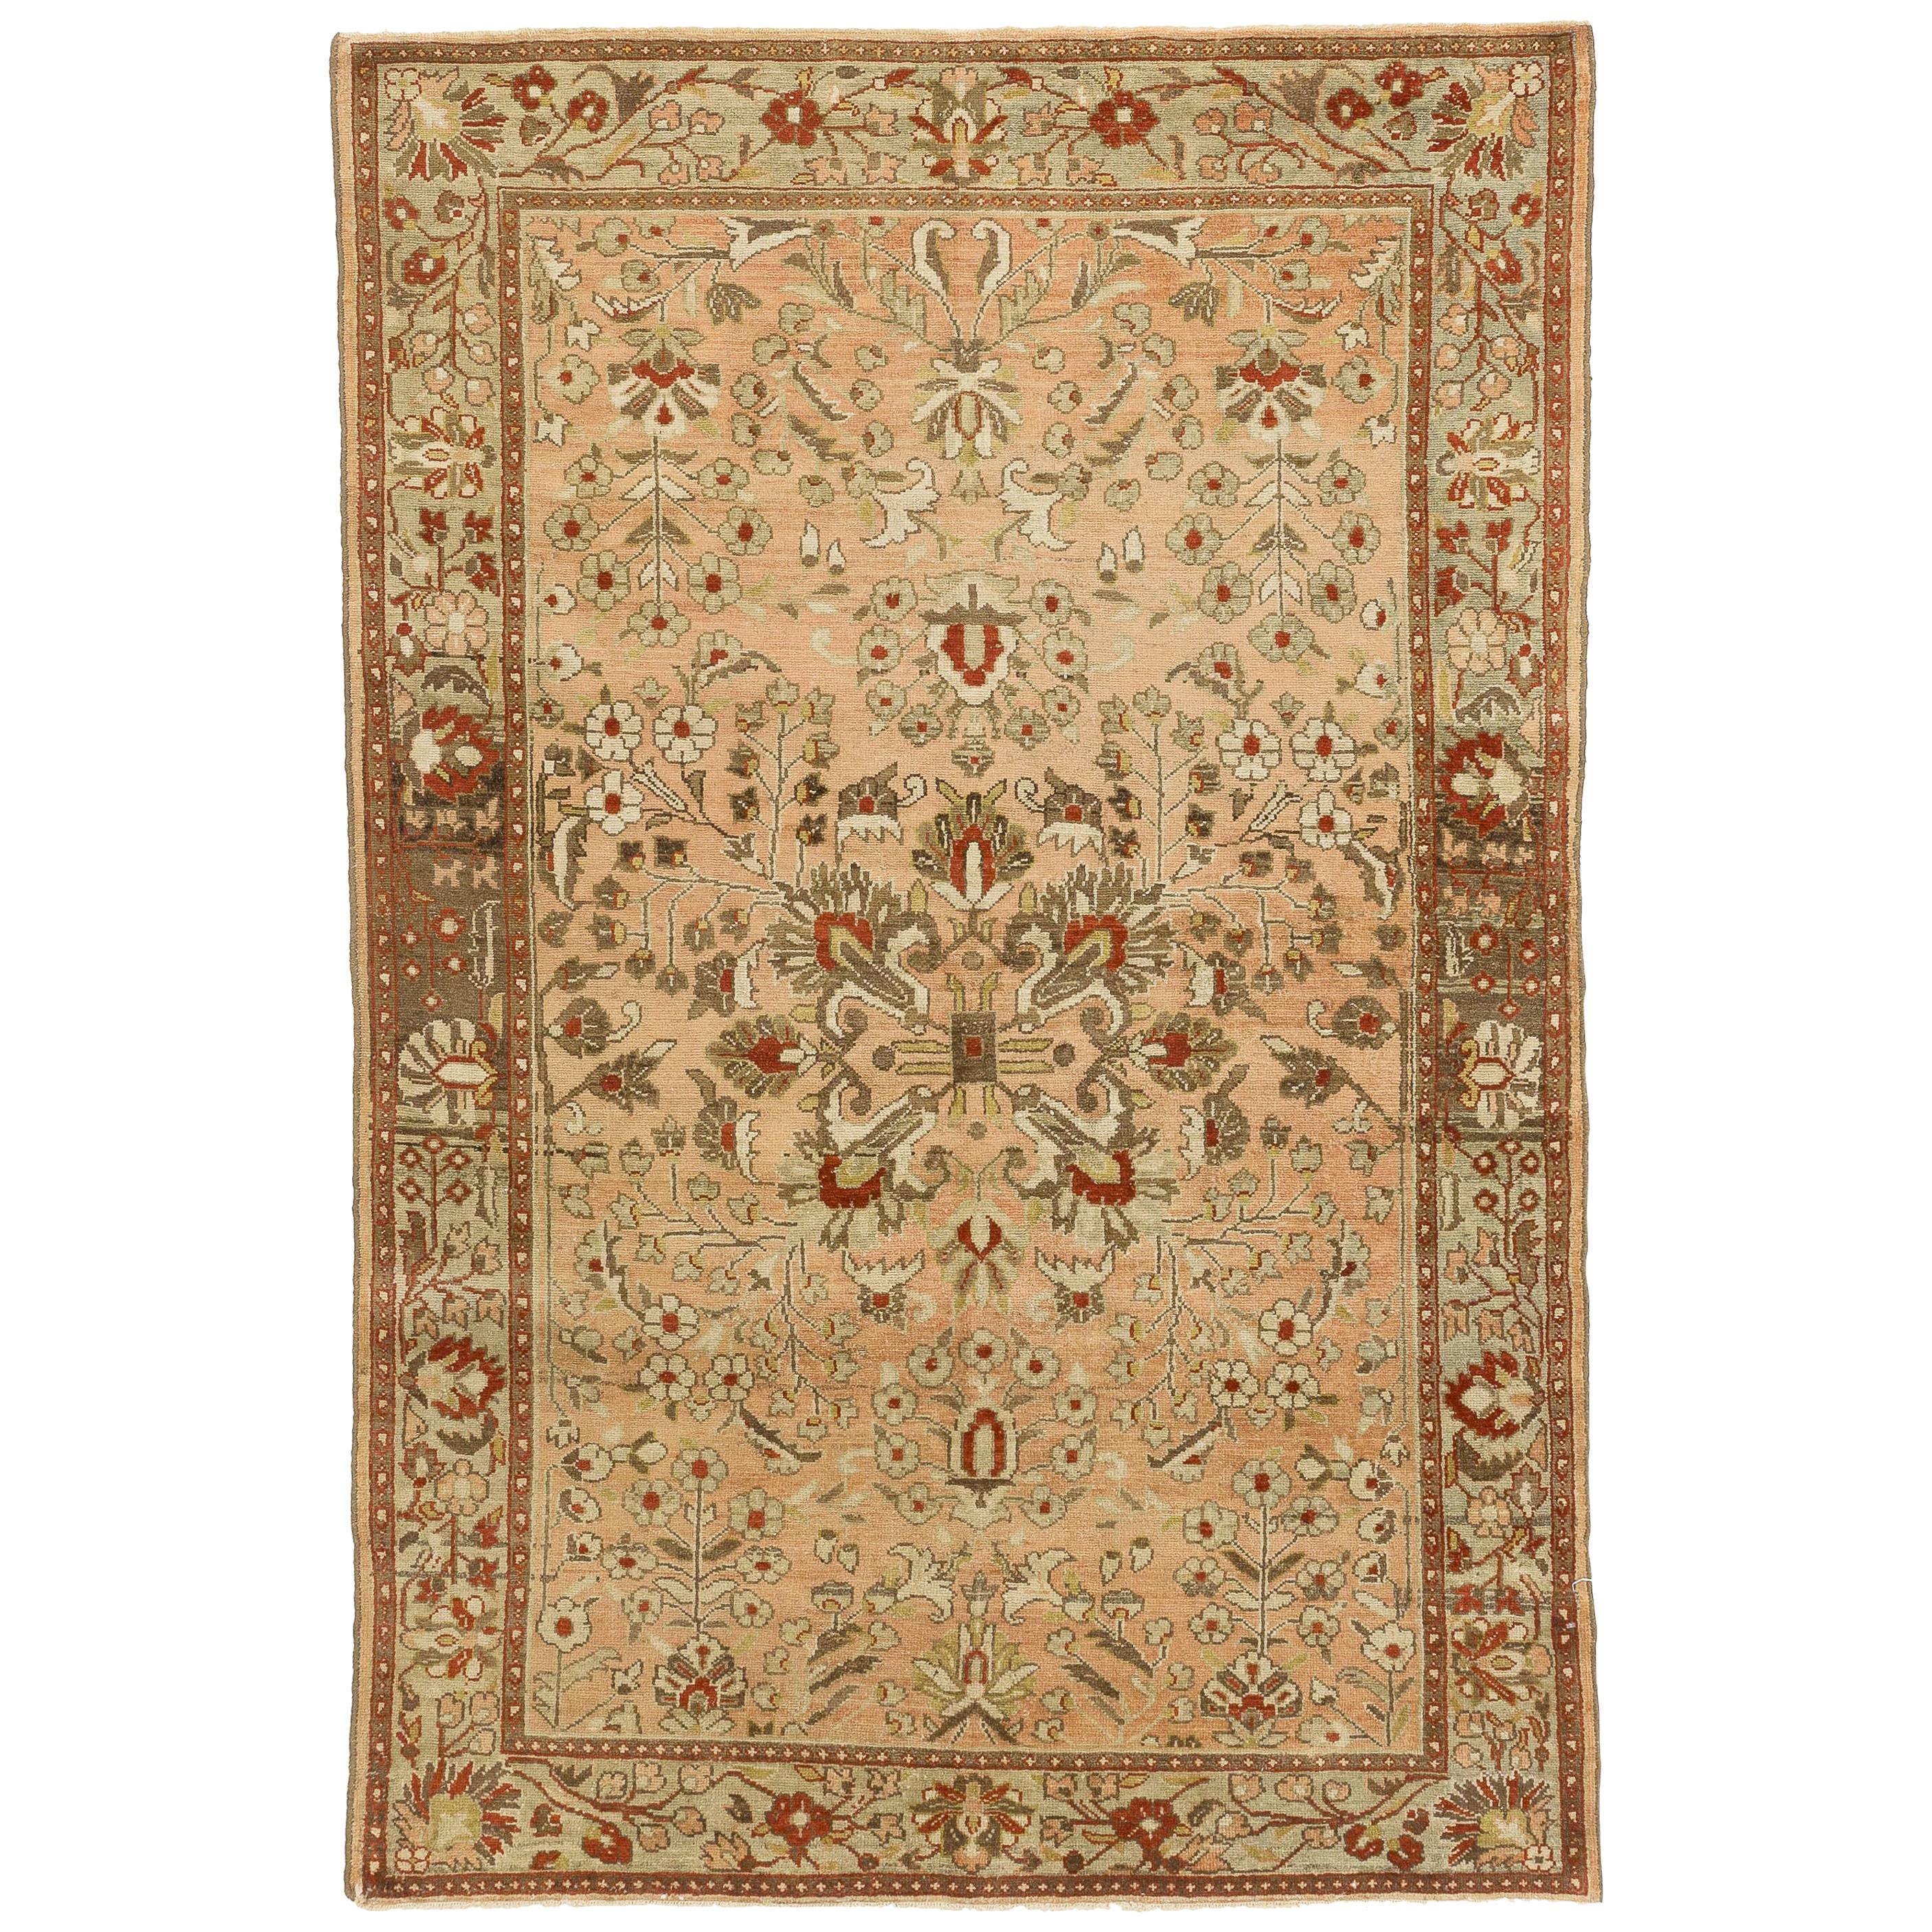 Antique Persian Malayer Rug with Ivory and Brown Floral Details on Beige Field